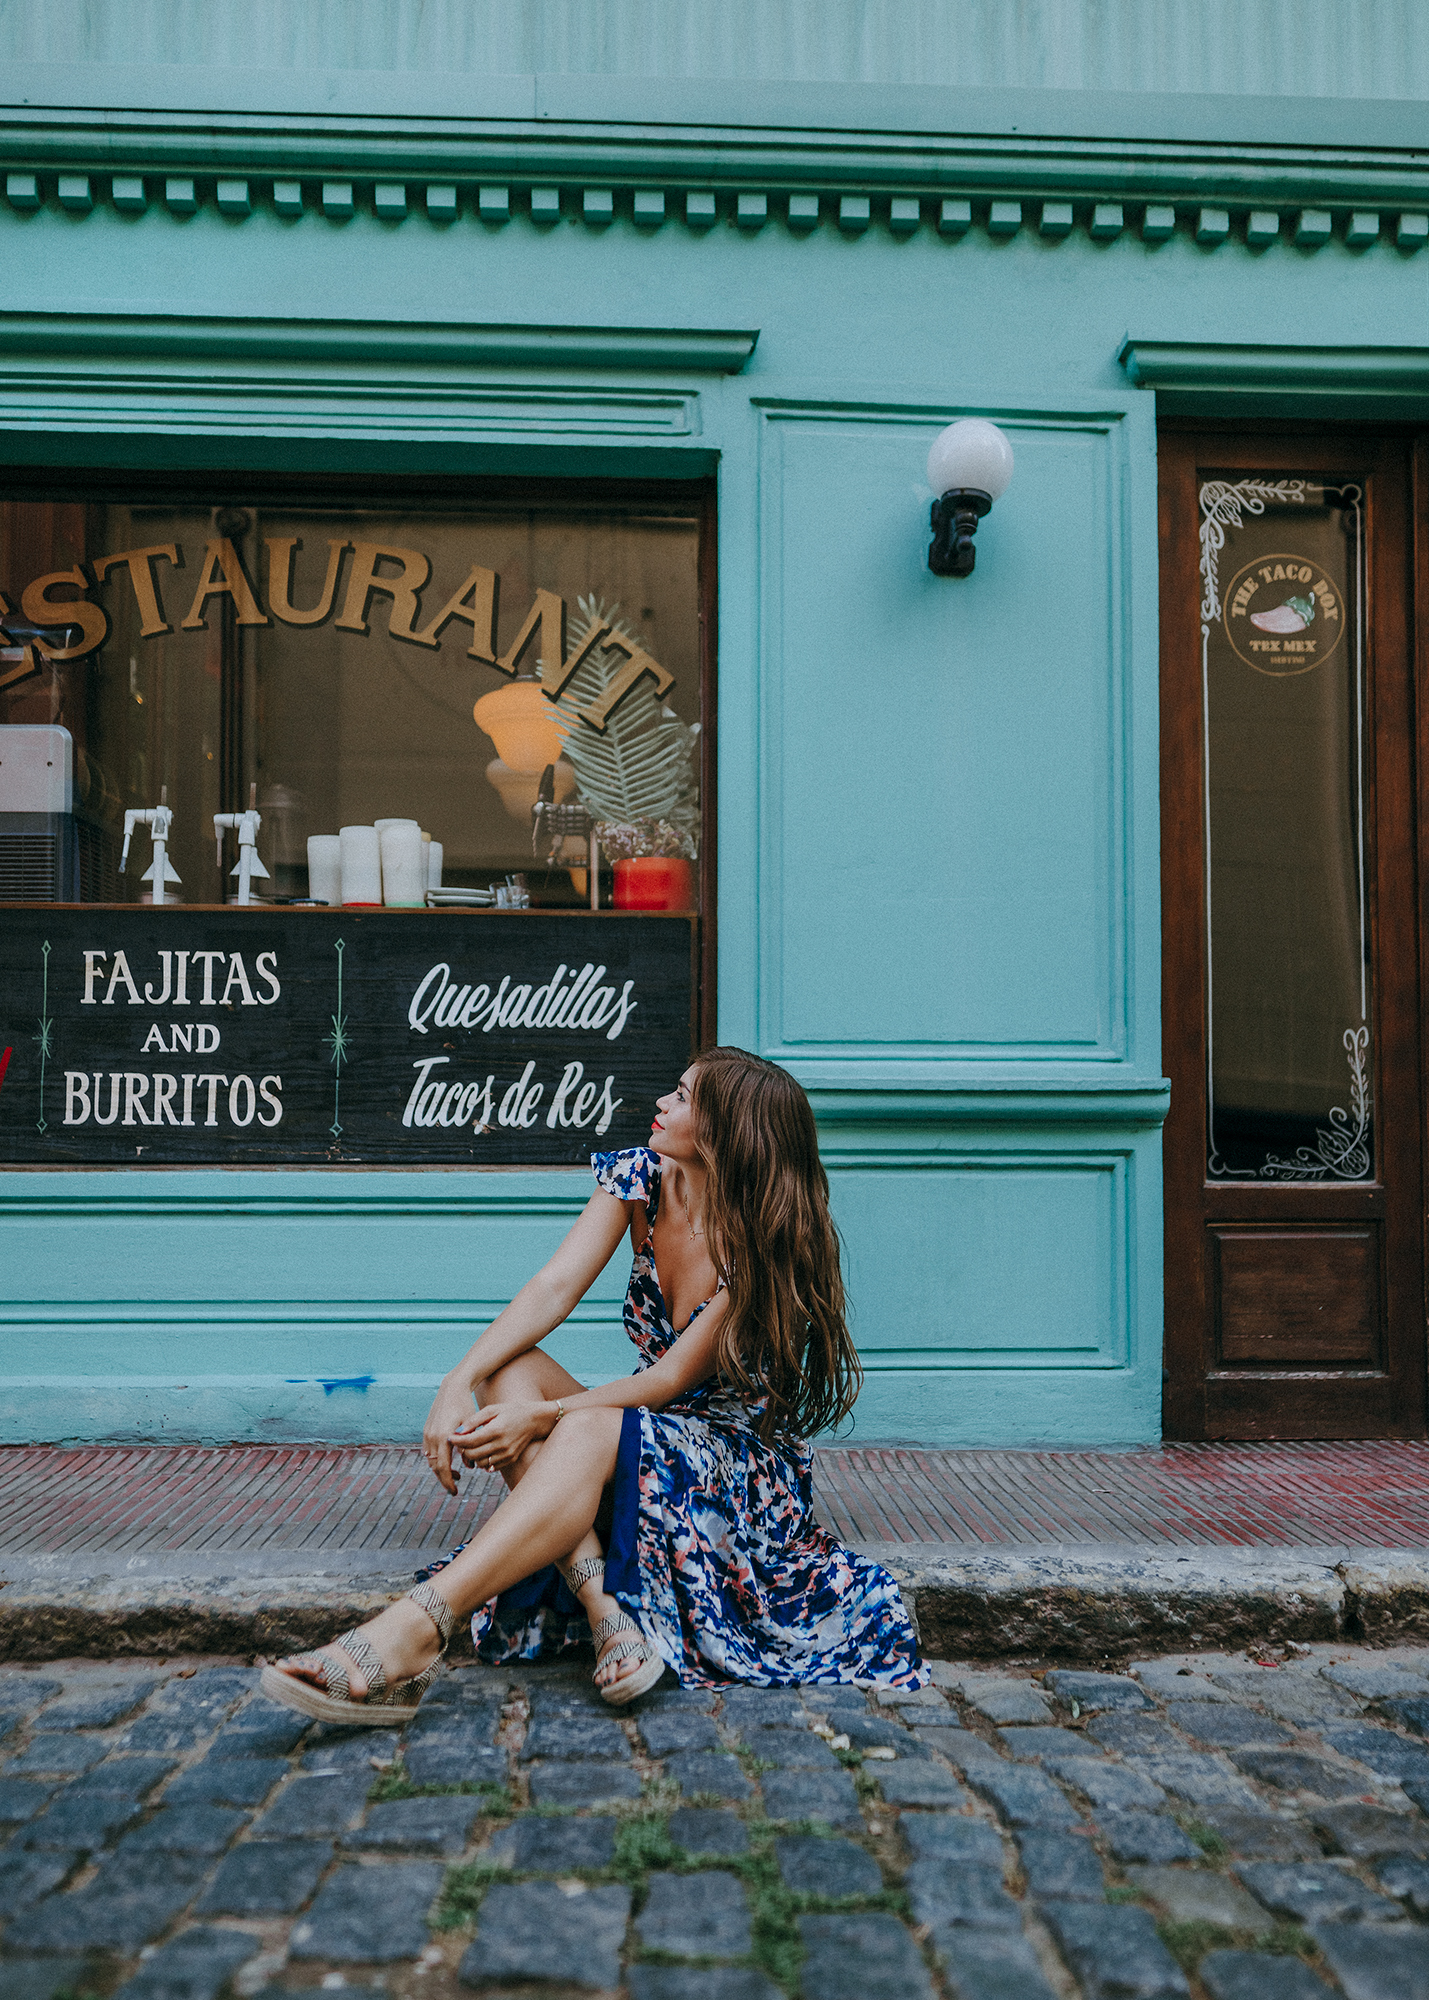 The Live Like a Local Travel Guide to Buenos Aires, Argentina